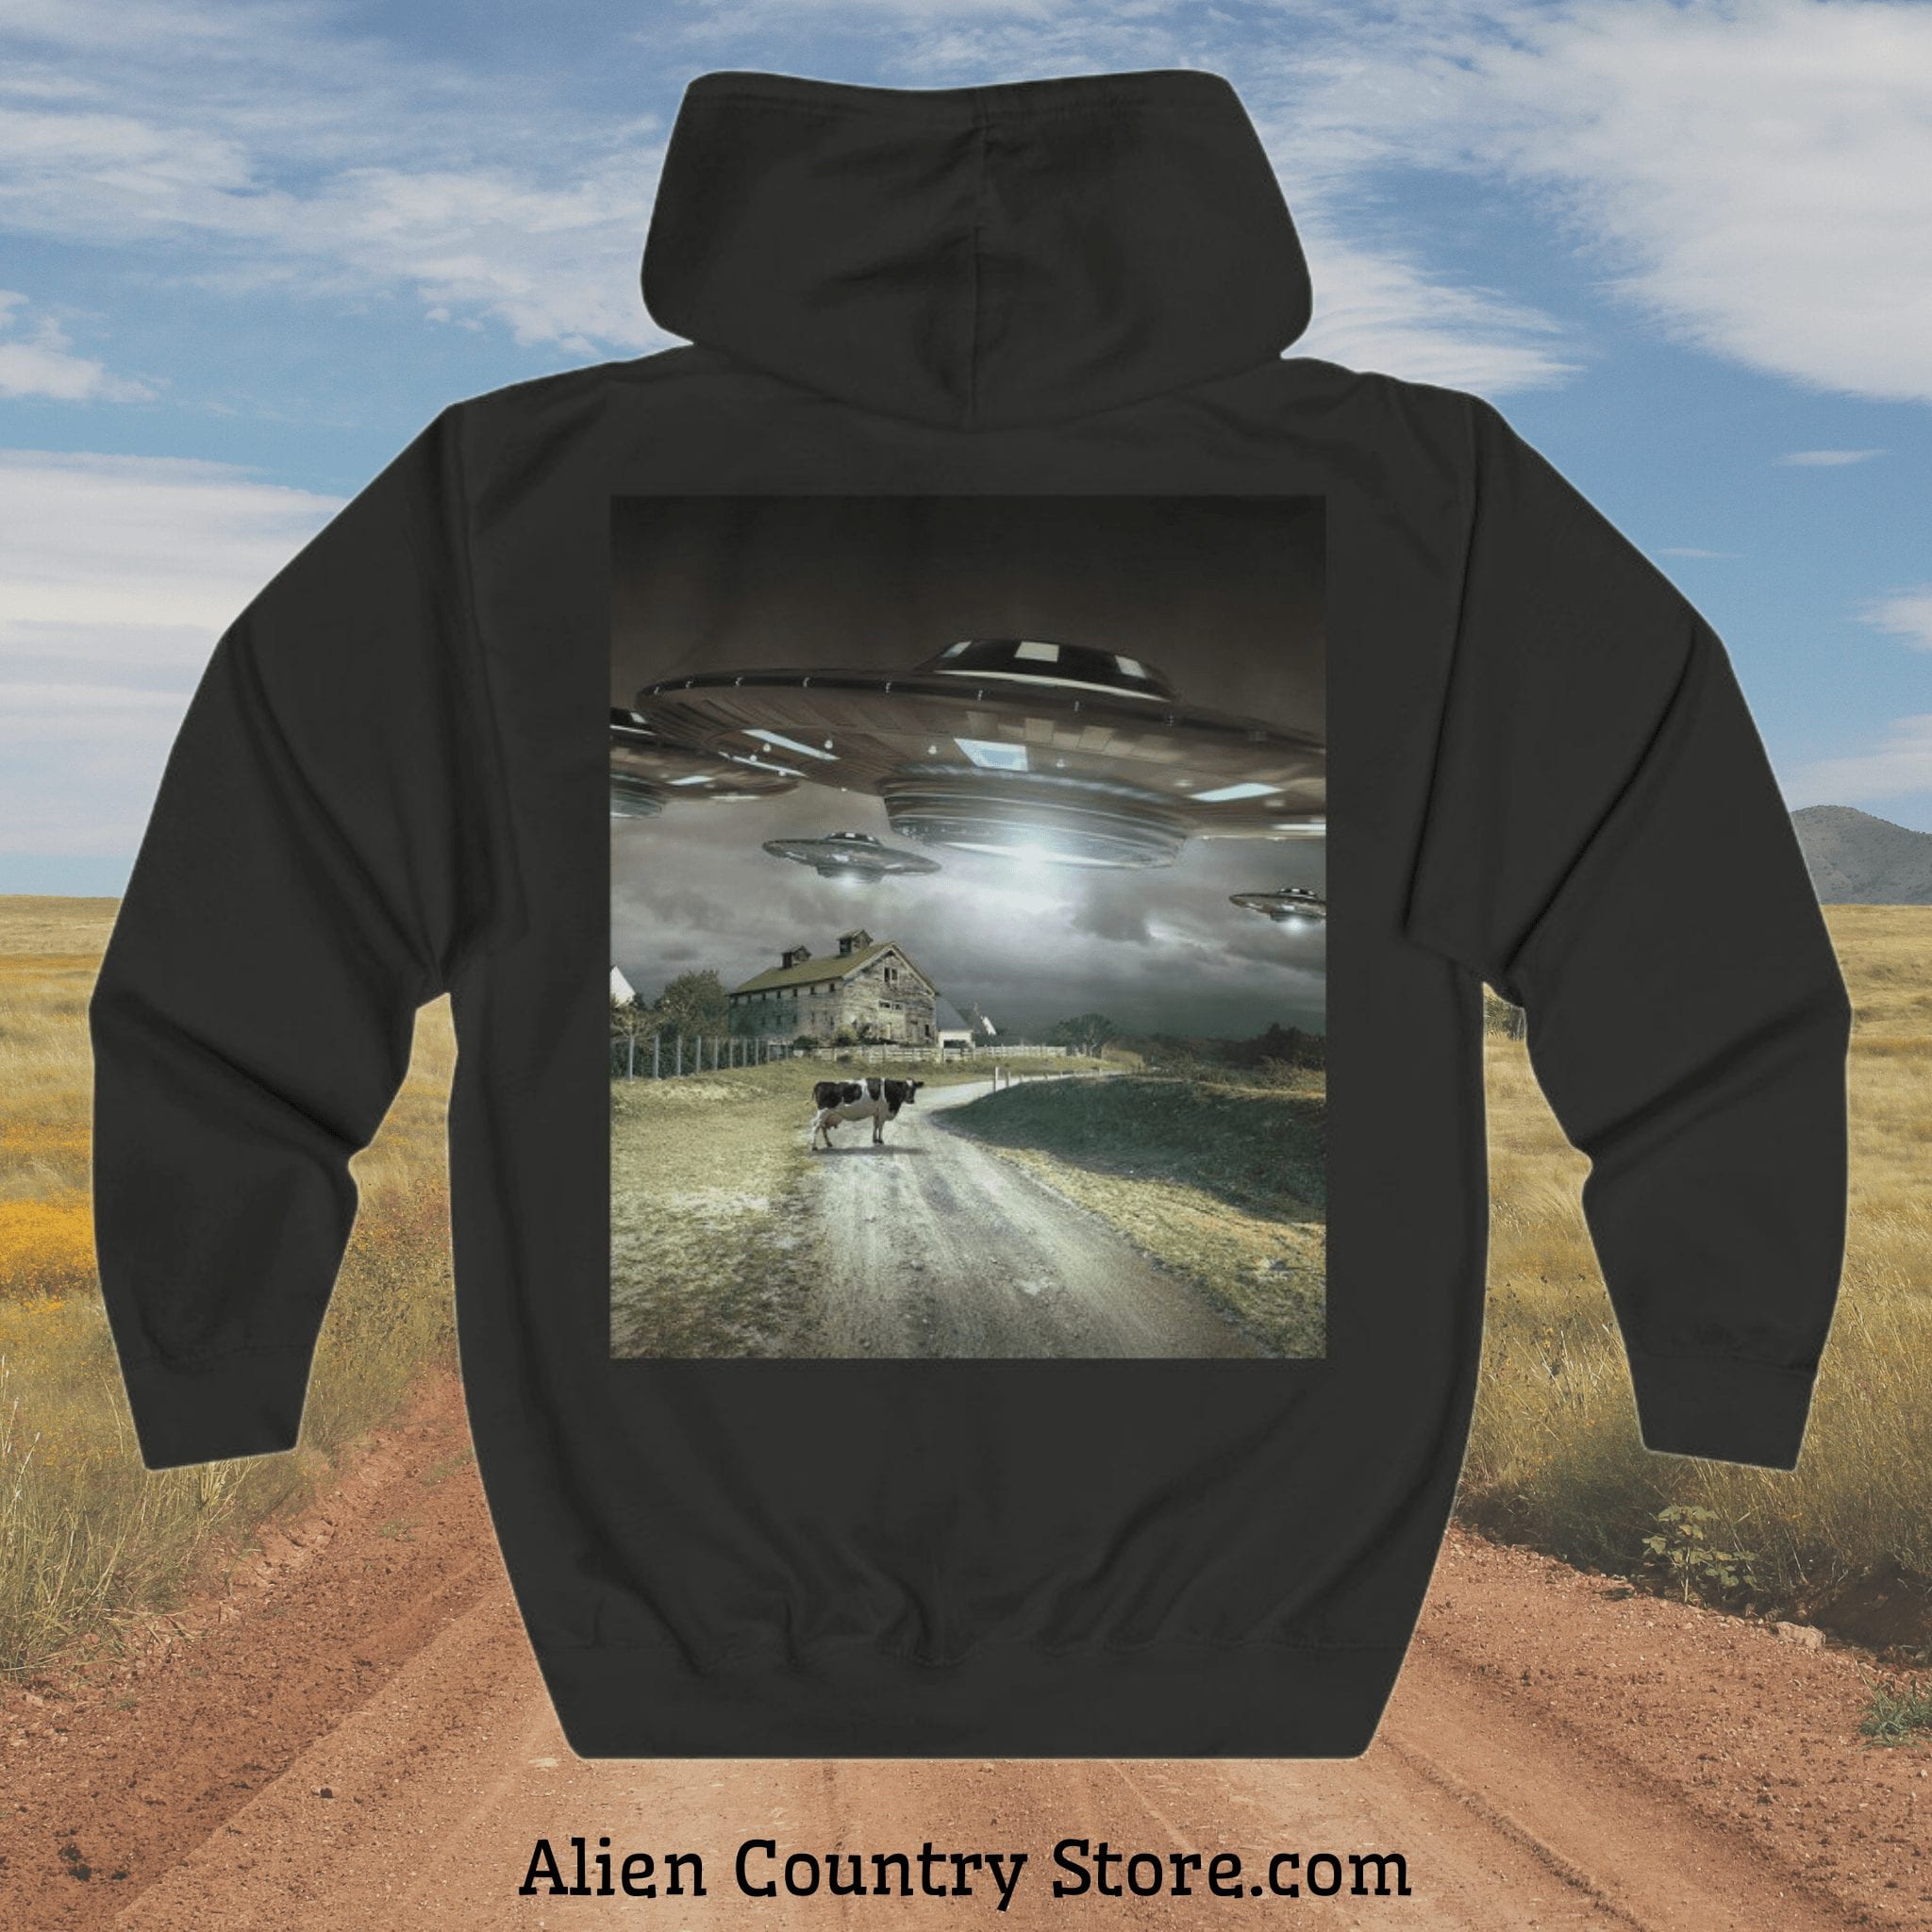 a photo of a hoodie with the image on the back. The image is a realistic pic of a cow standing in a country dirt road at sunset under a cloudy sky. Three UFO's hover nearby overhead.